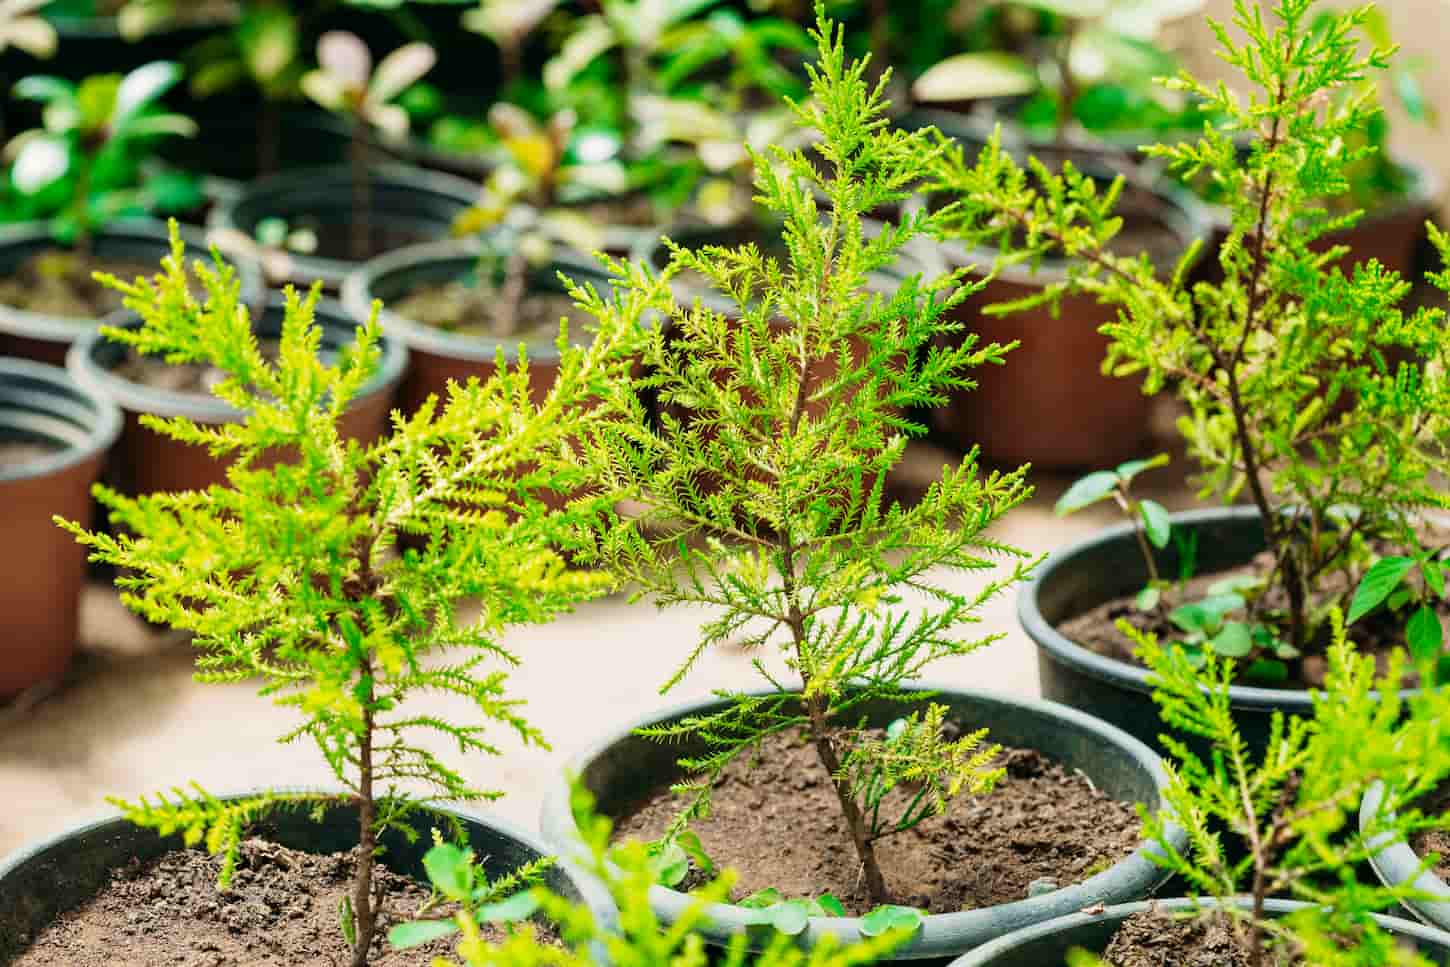 An image of Small Green Sprouts Of Spruce Or Fir-tree Tree Plant With Leaf, Leaves Growing From Soil In Pots In Greenhouse Or Hothouse. Spring, Concept Of New Life.